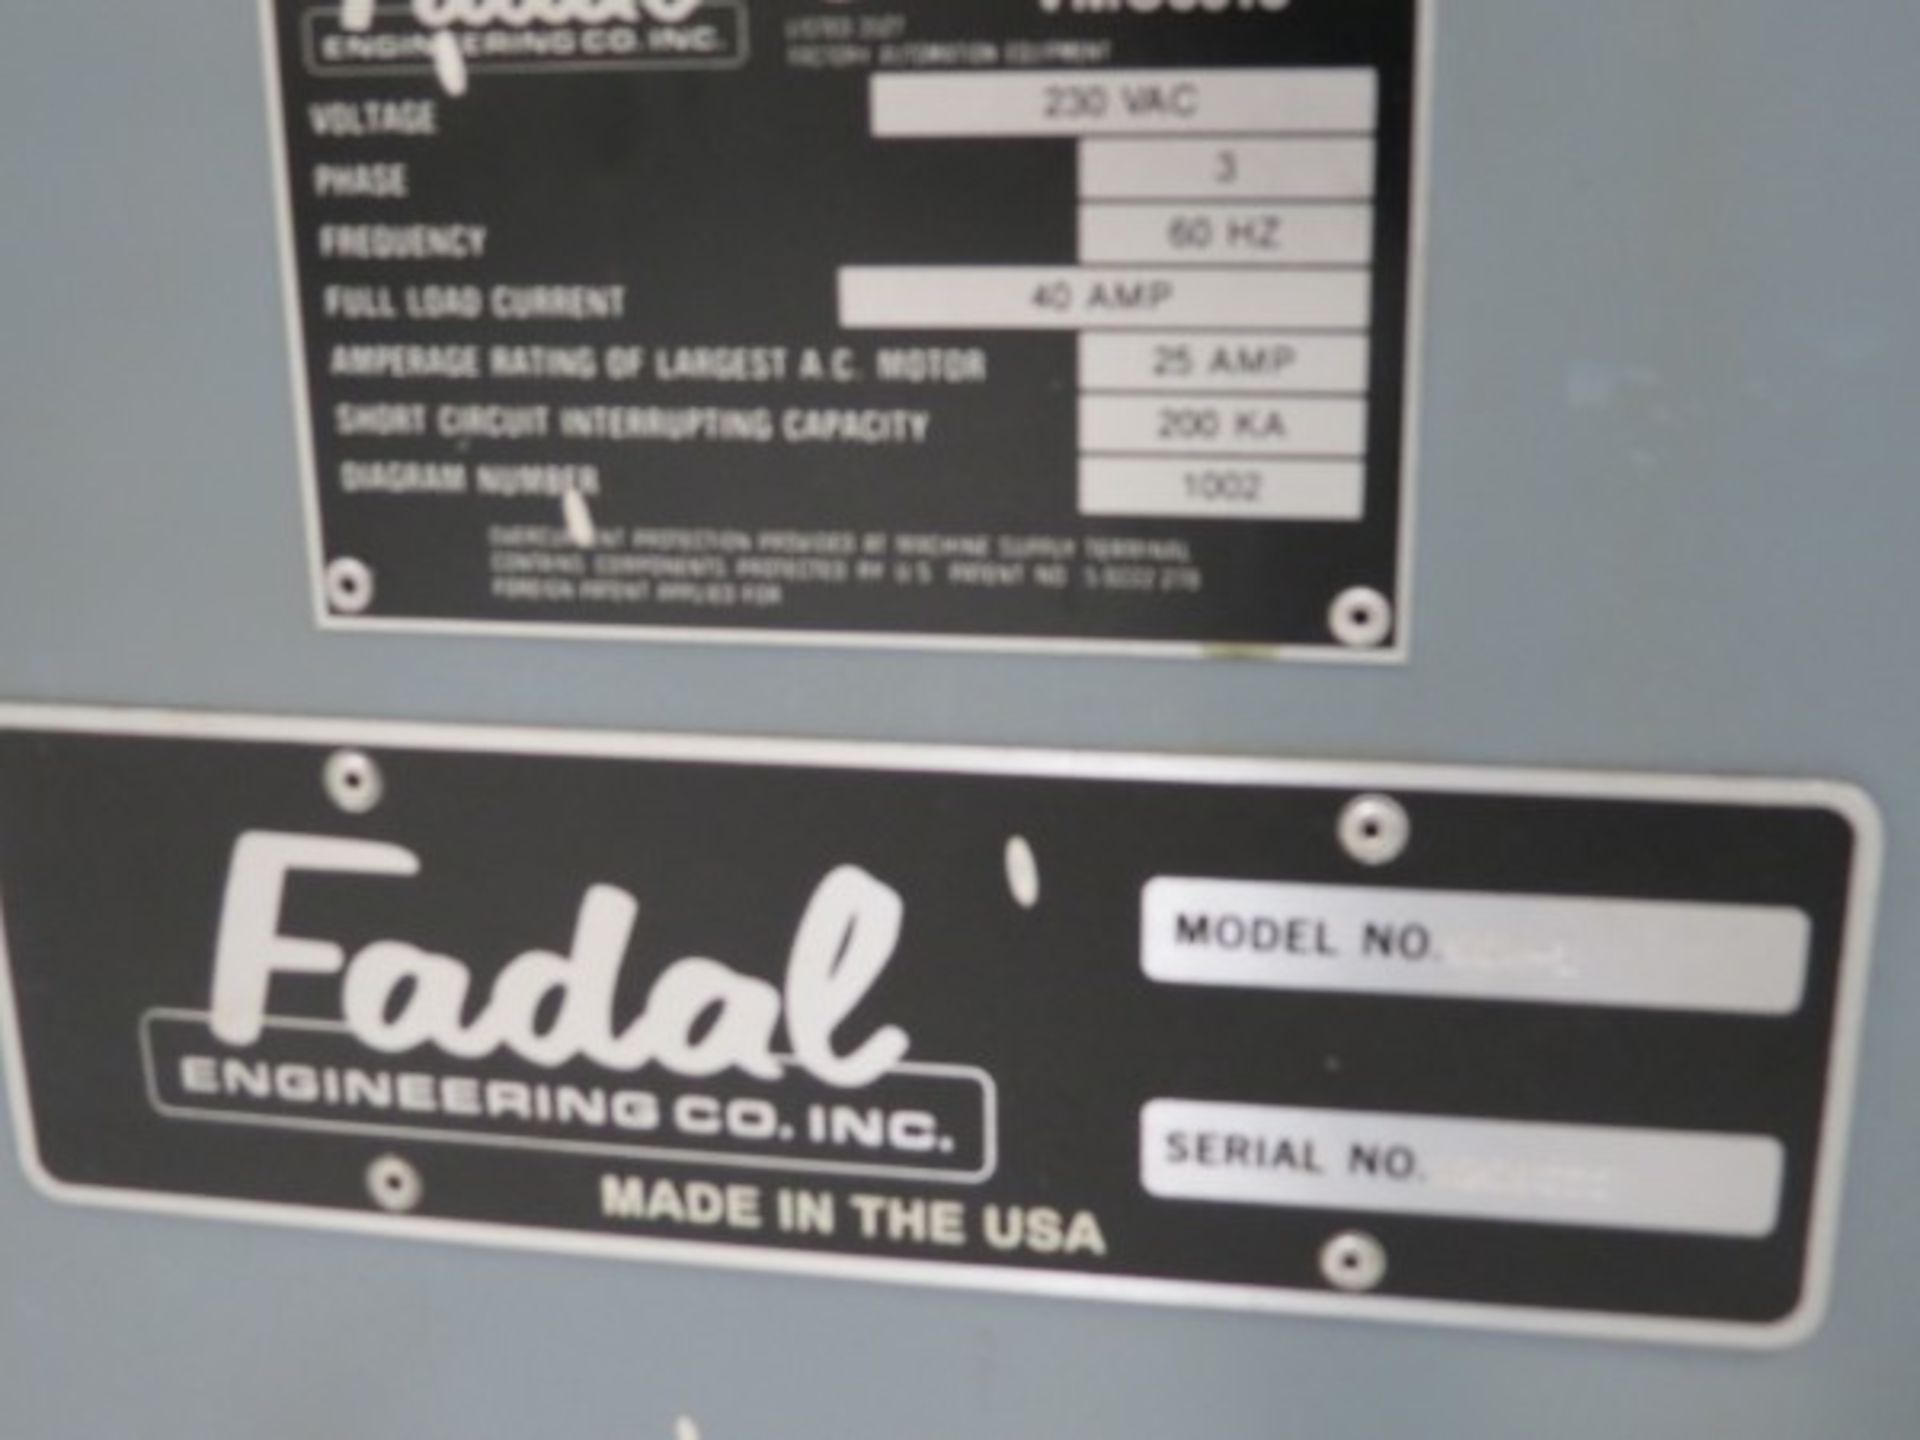 Fadal VMC-3016 4 Axis Vertical Machining Center, 88 control, CT40, 21 ATC, s/n 9209555, new 1992 - Image 6 of 7